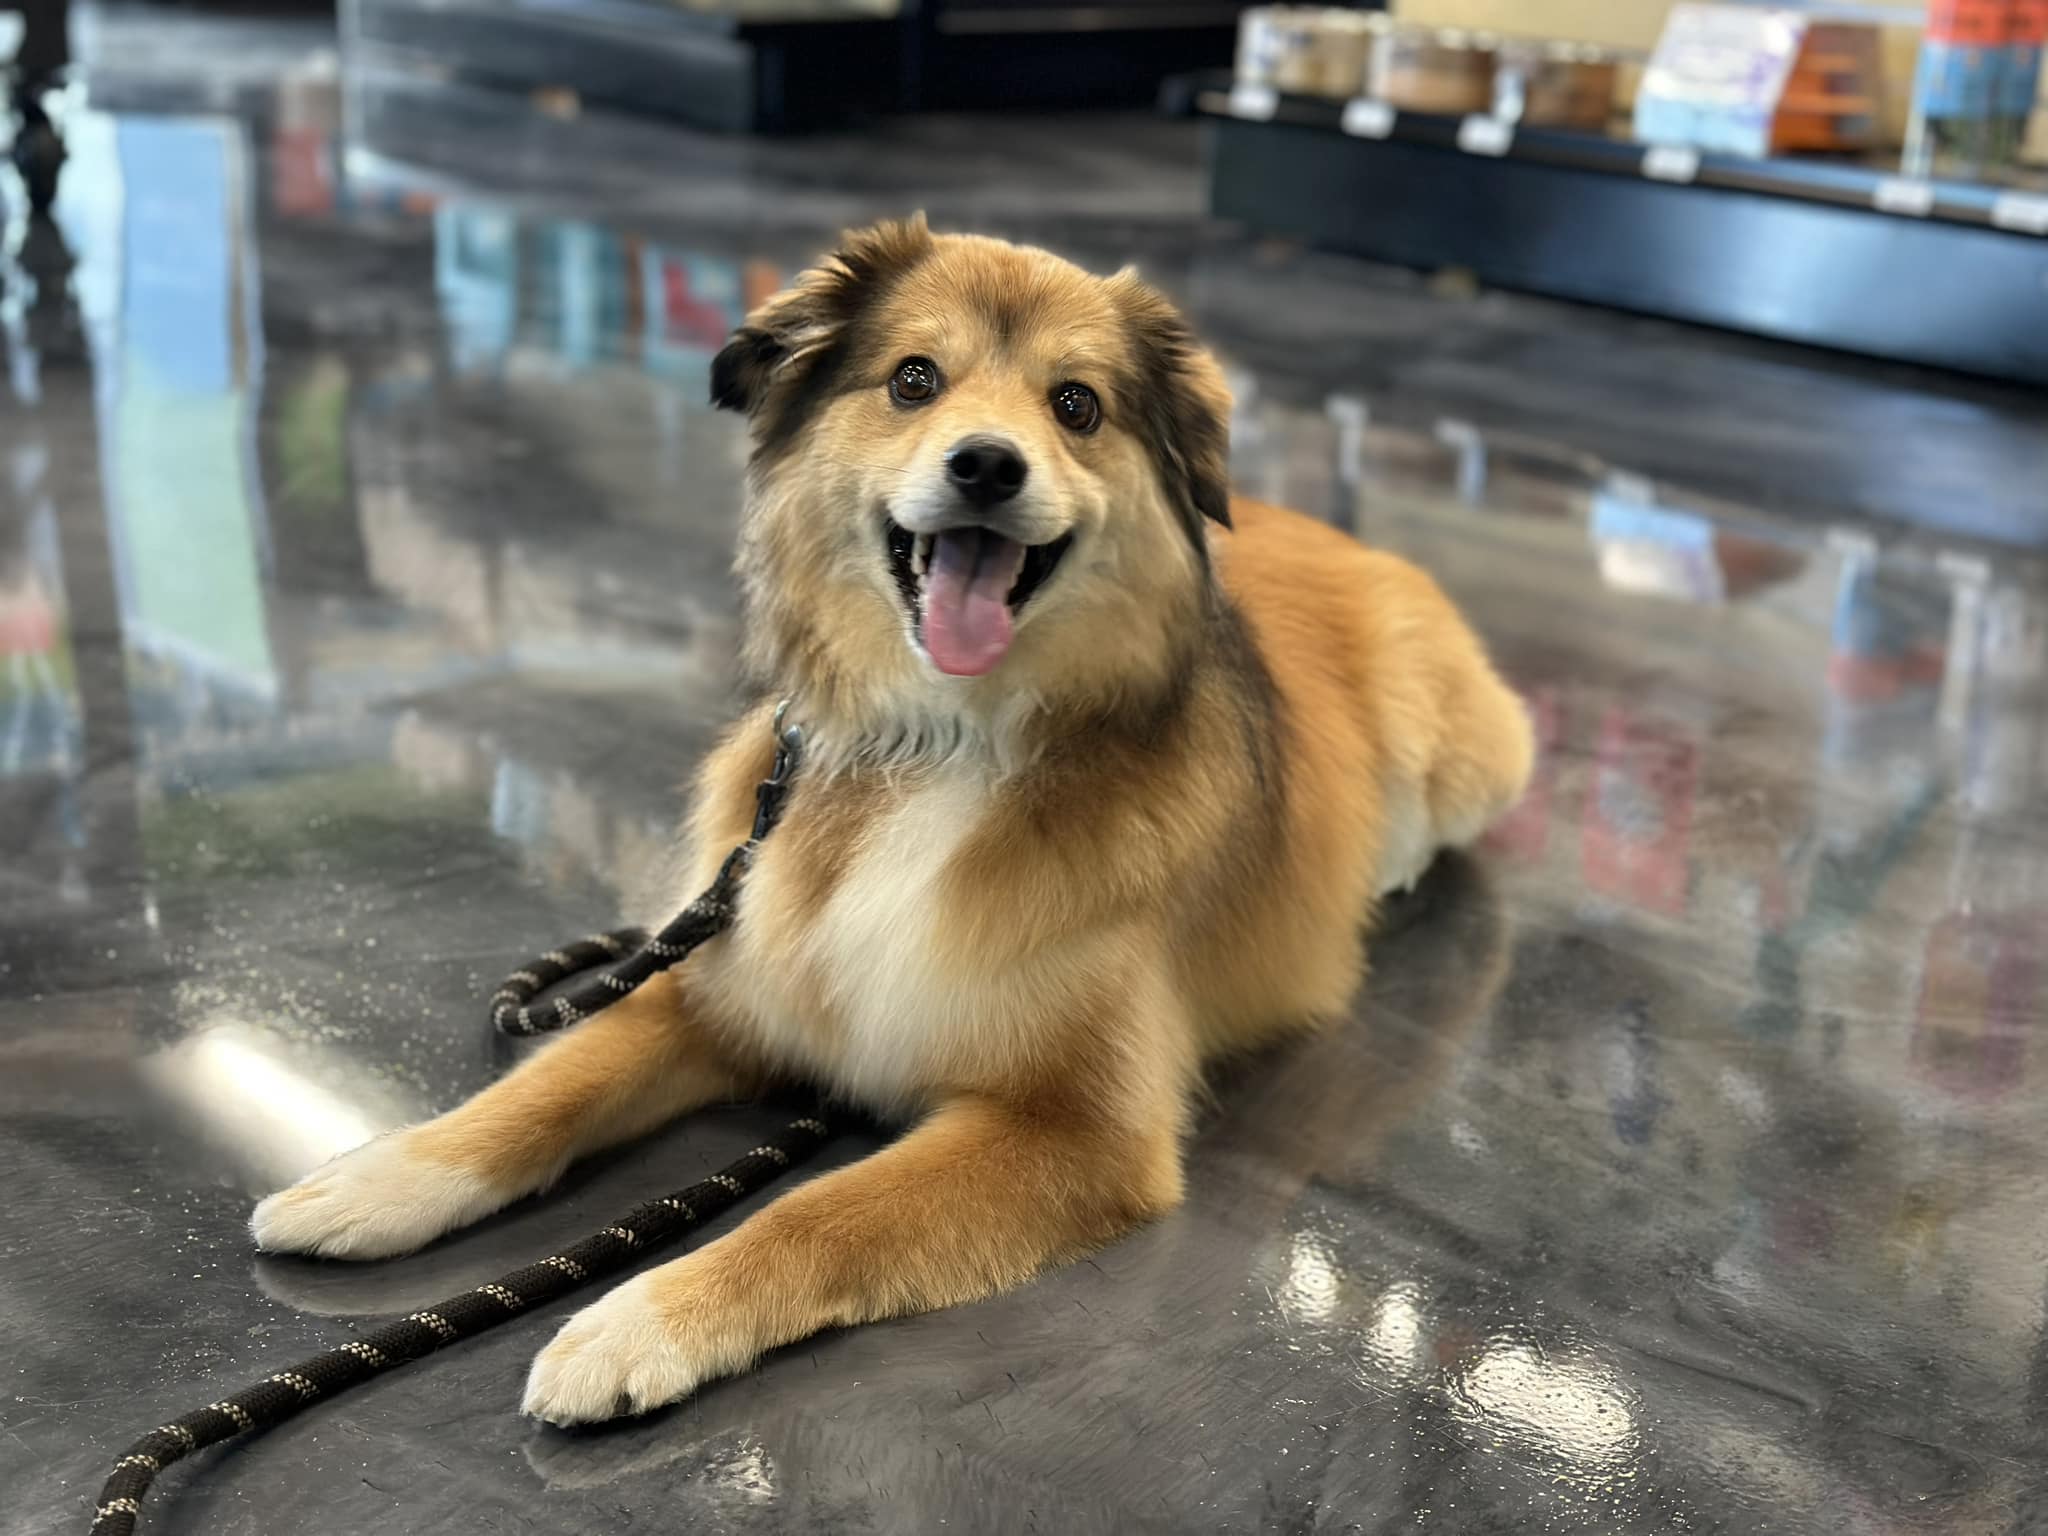 Dog-In-Store